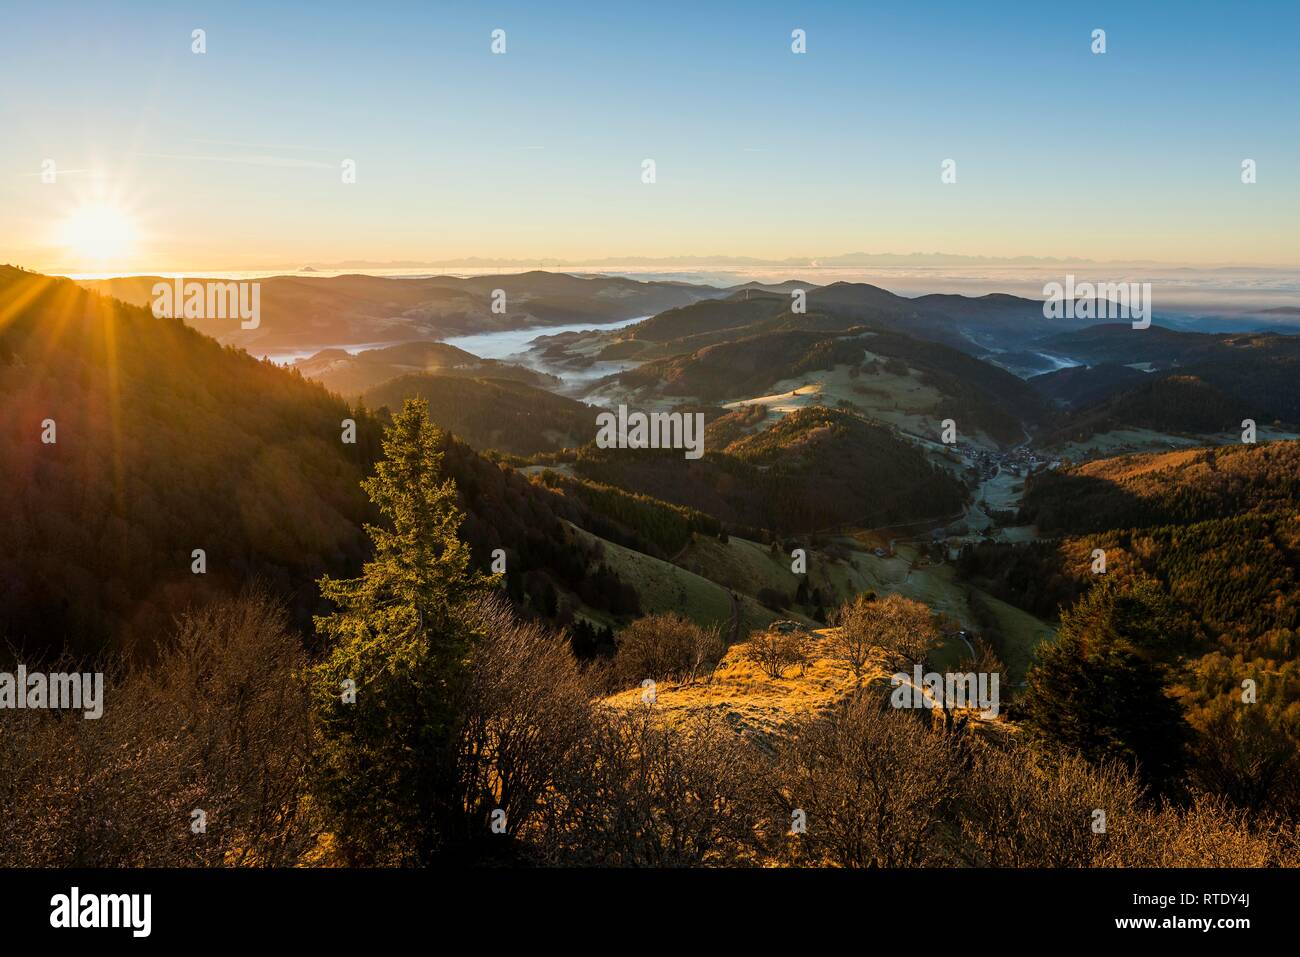 View from Belchen into Wiesental valley, morning mood with fog, Black Forest, Baden-Württemberg, Germany Stock Photo